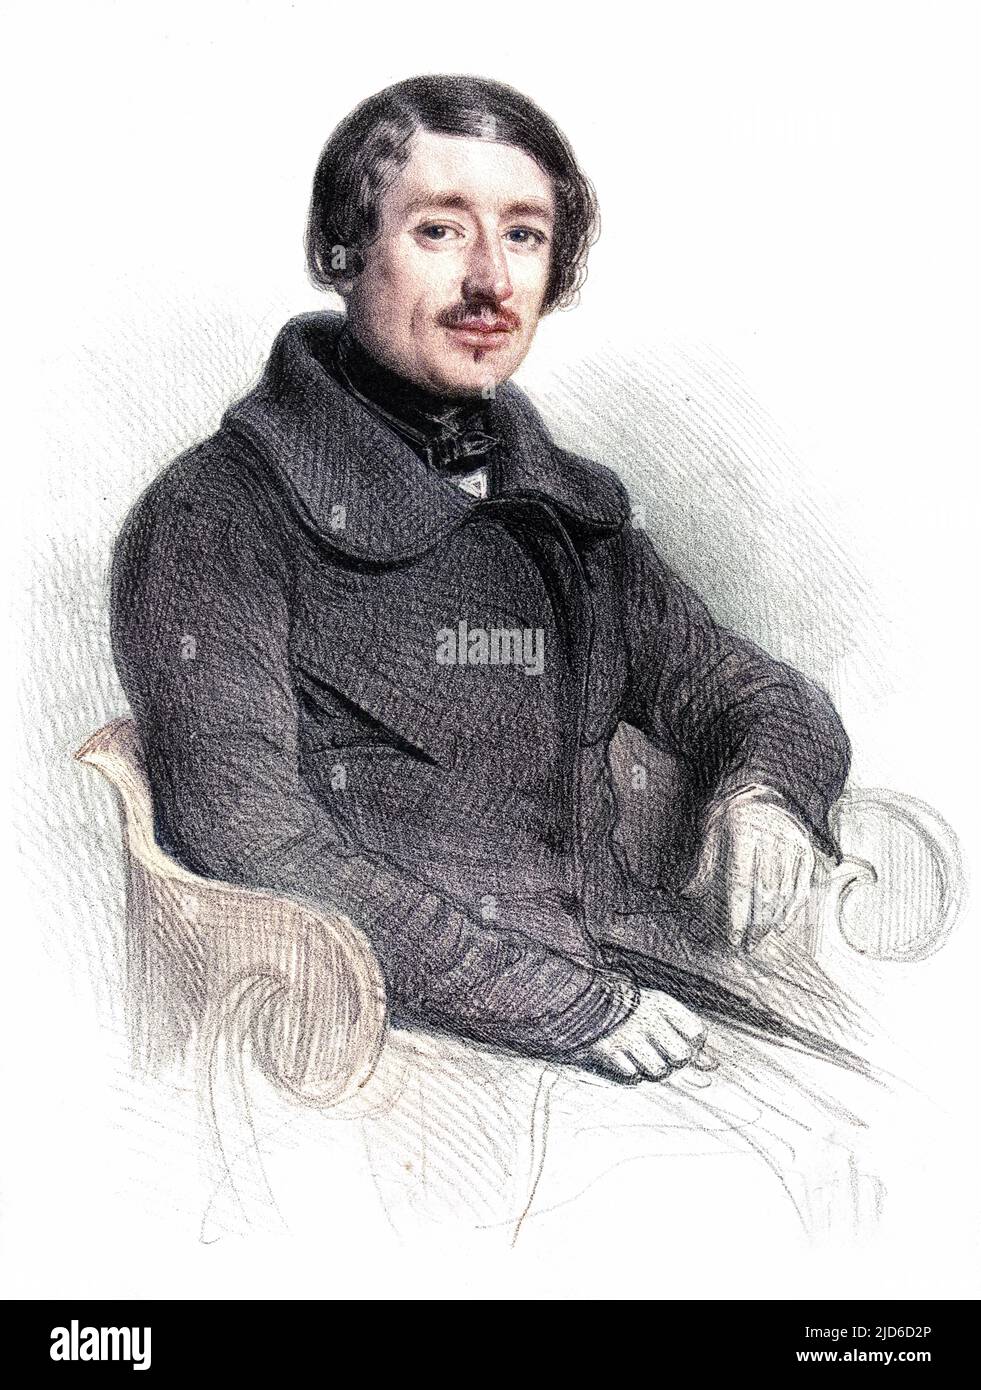 DENIS AUGUSTE MARIE RAFFET French artist Colourised version of : 10173333       Date: 1804 - 1860 Stock Photo